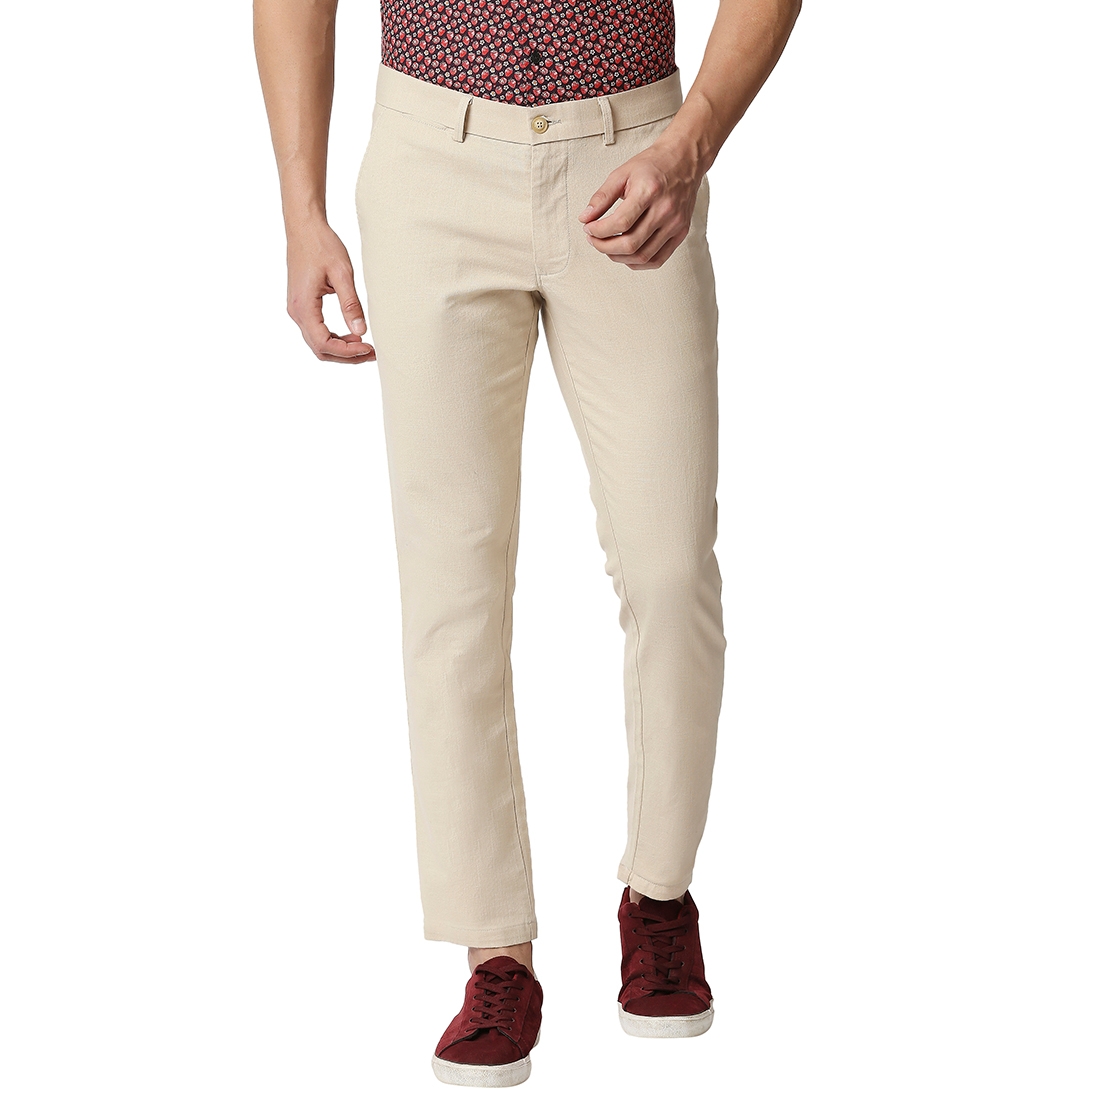 Basics | BASICS CASUAL PLAIN BEIGE COTTON STRETCH TAPERED TROUSERS 